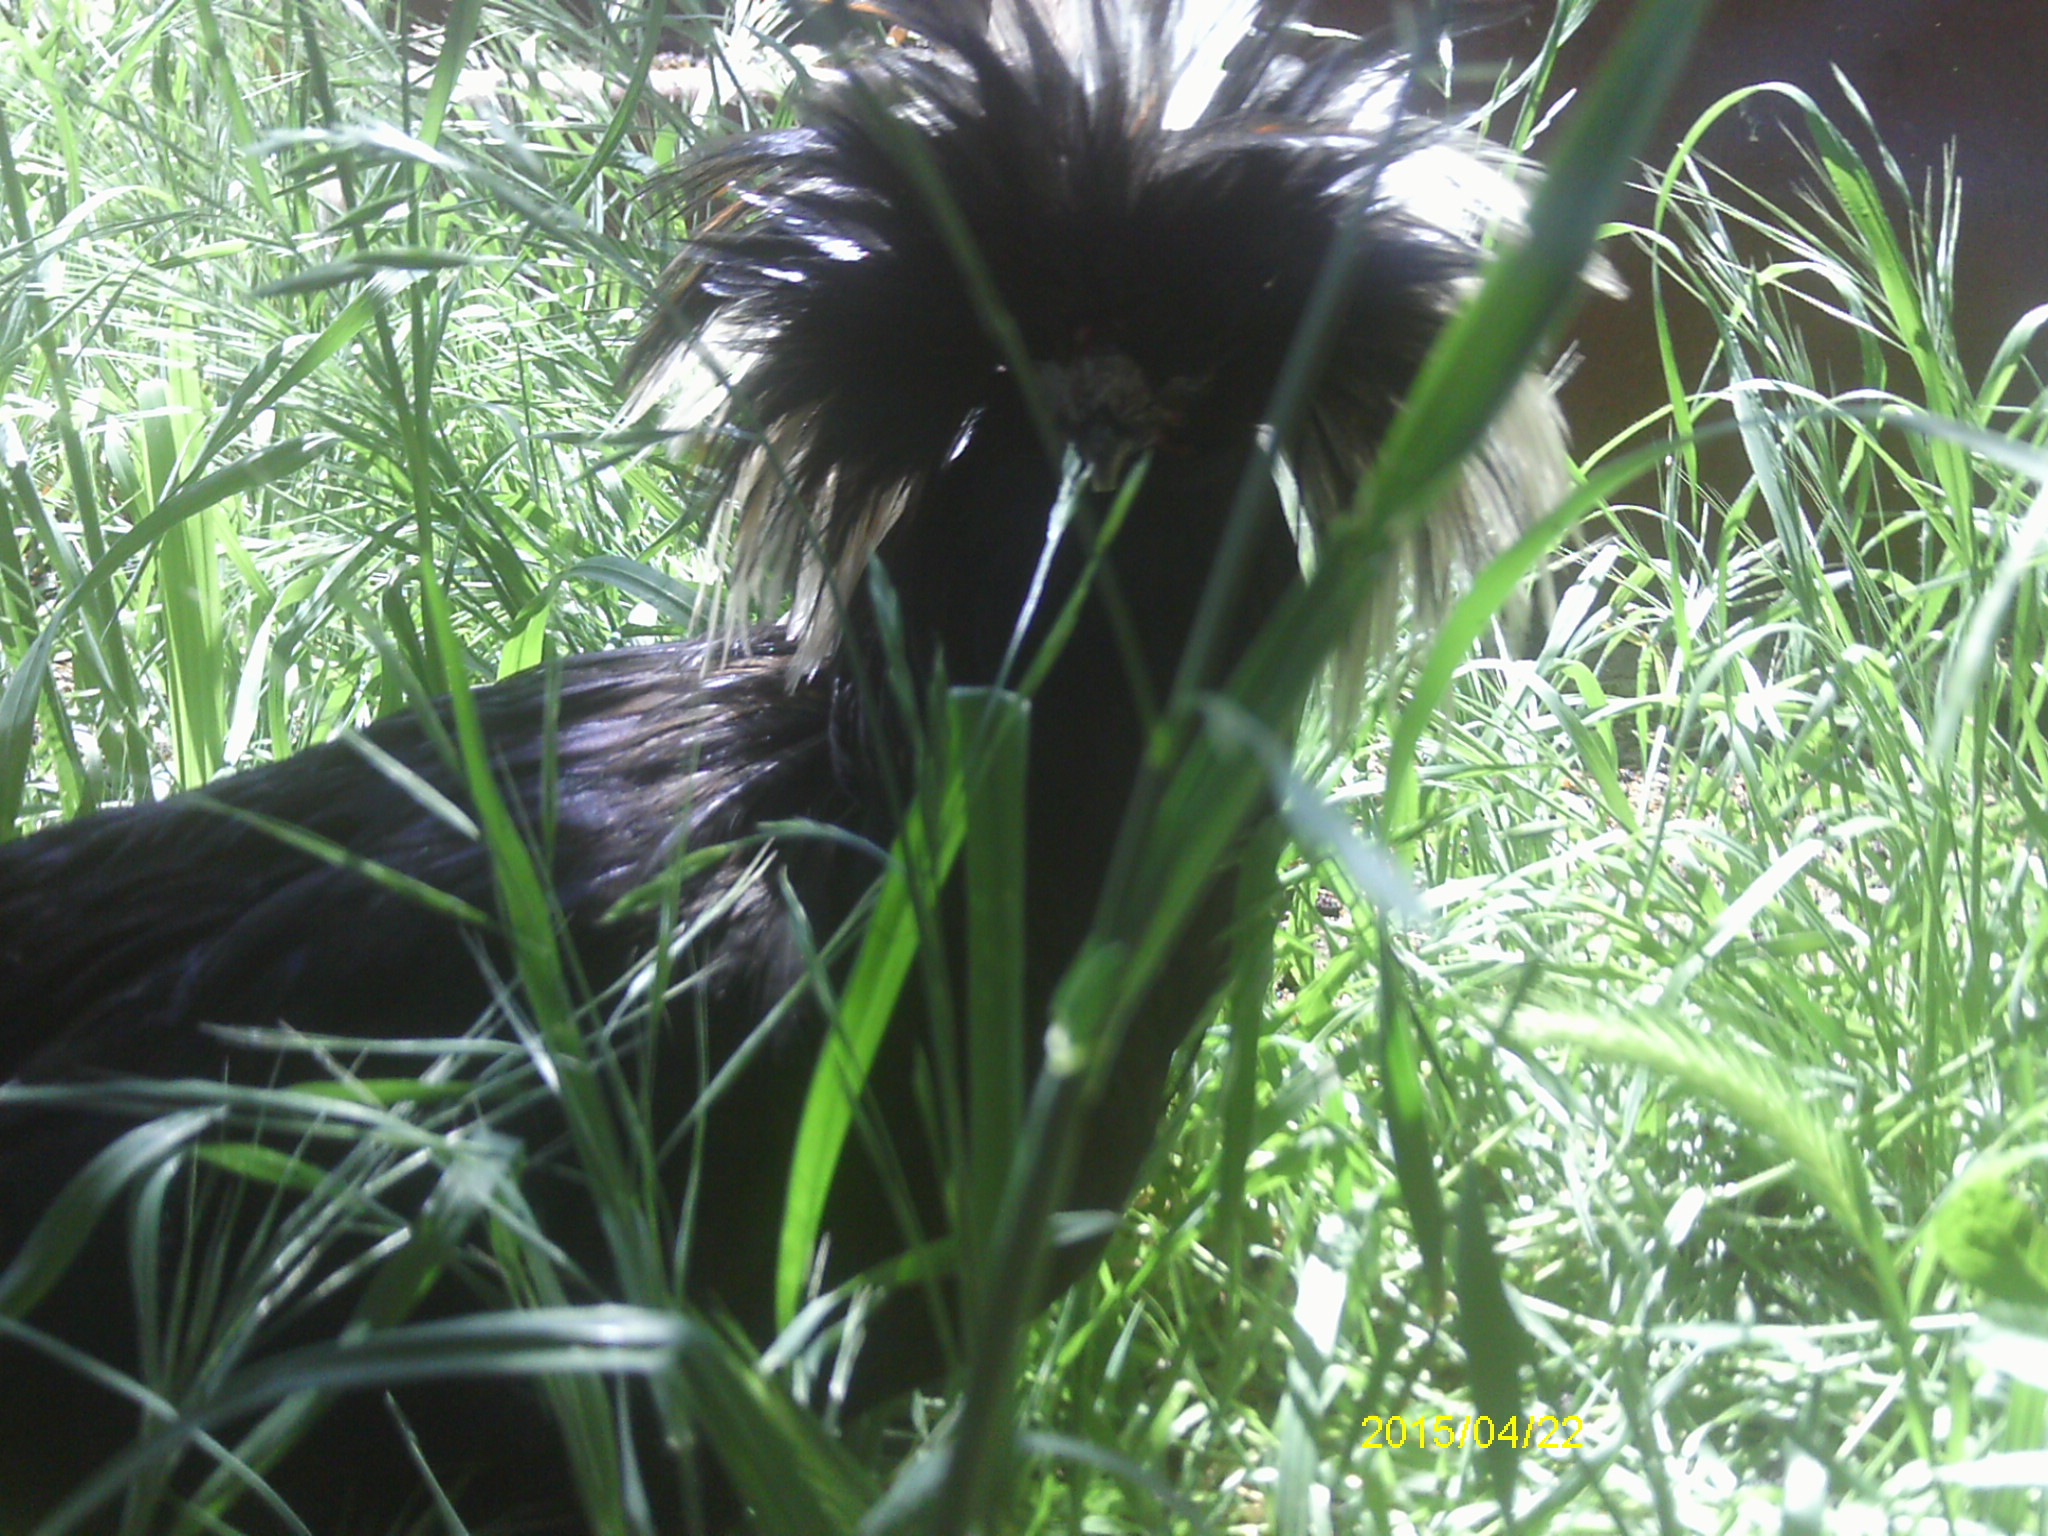 Rasta Rooster, in stealth mode....